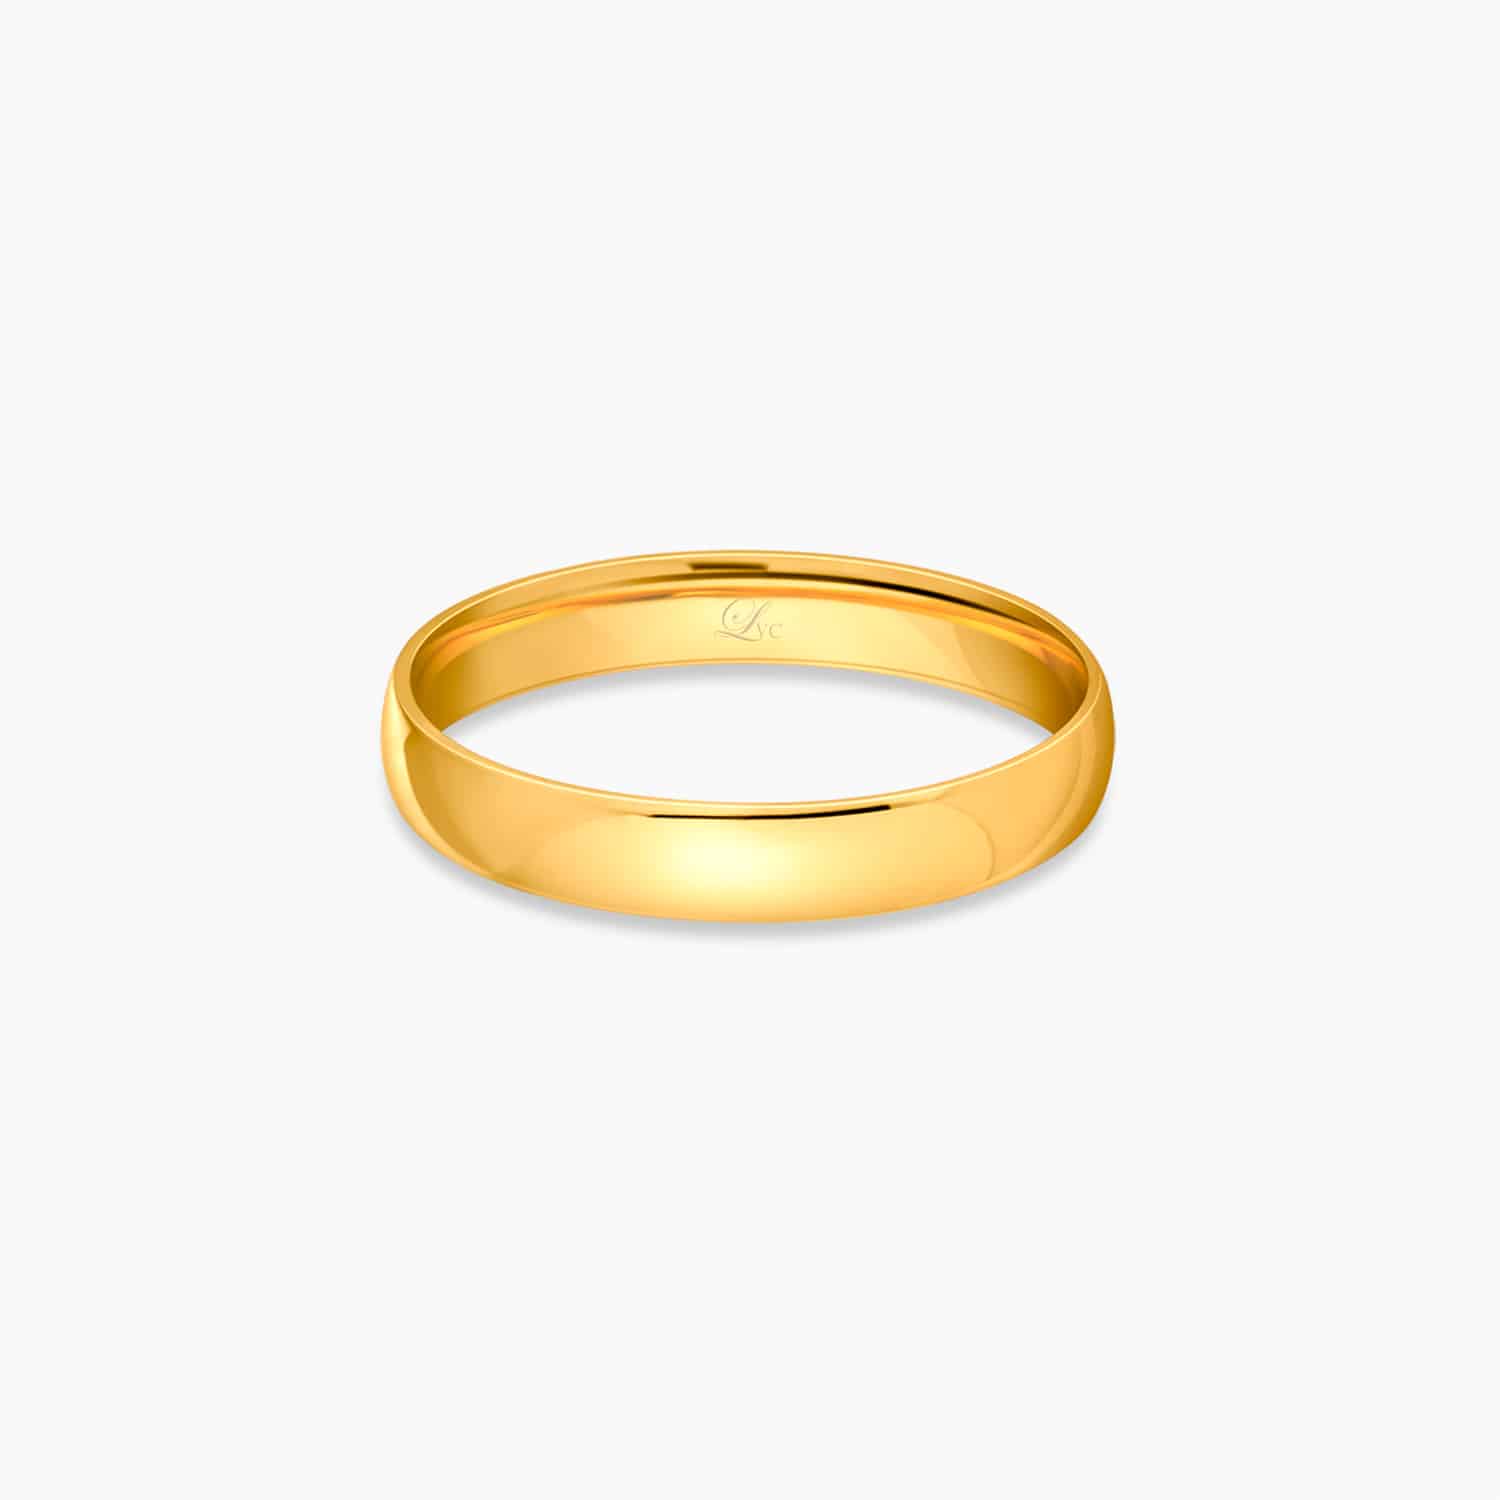 LVC CLASSIQUE WEDDING BAND IN YELLOW GOLD a wedding band for men in yellow gold 金 戒指